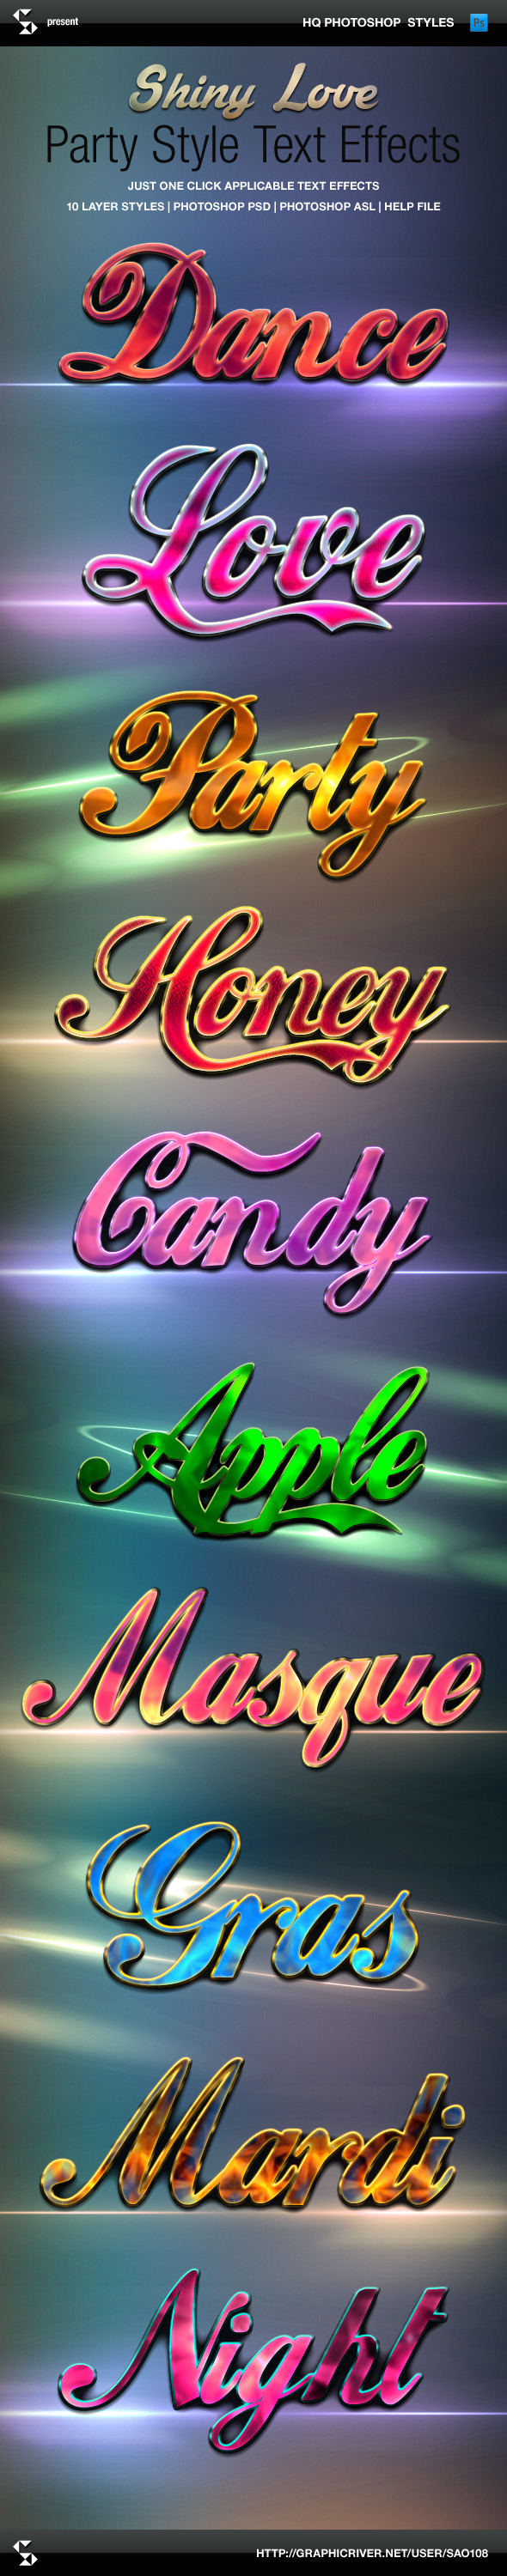 Shiny Love Party Style Text Effects